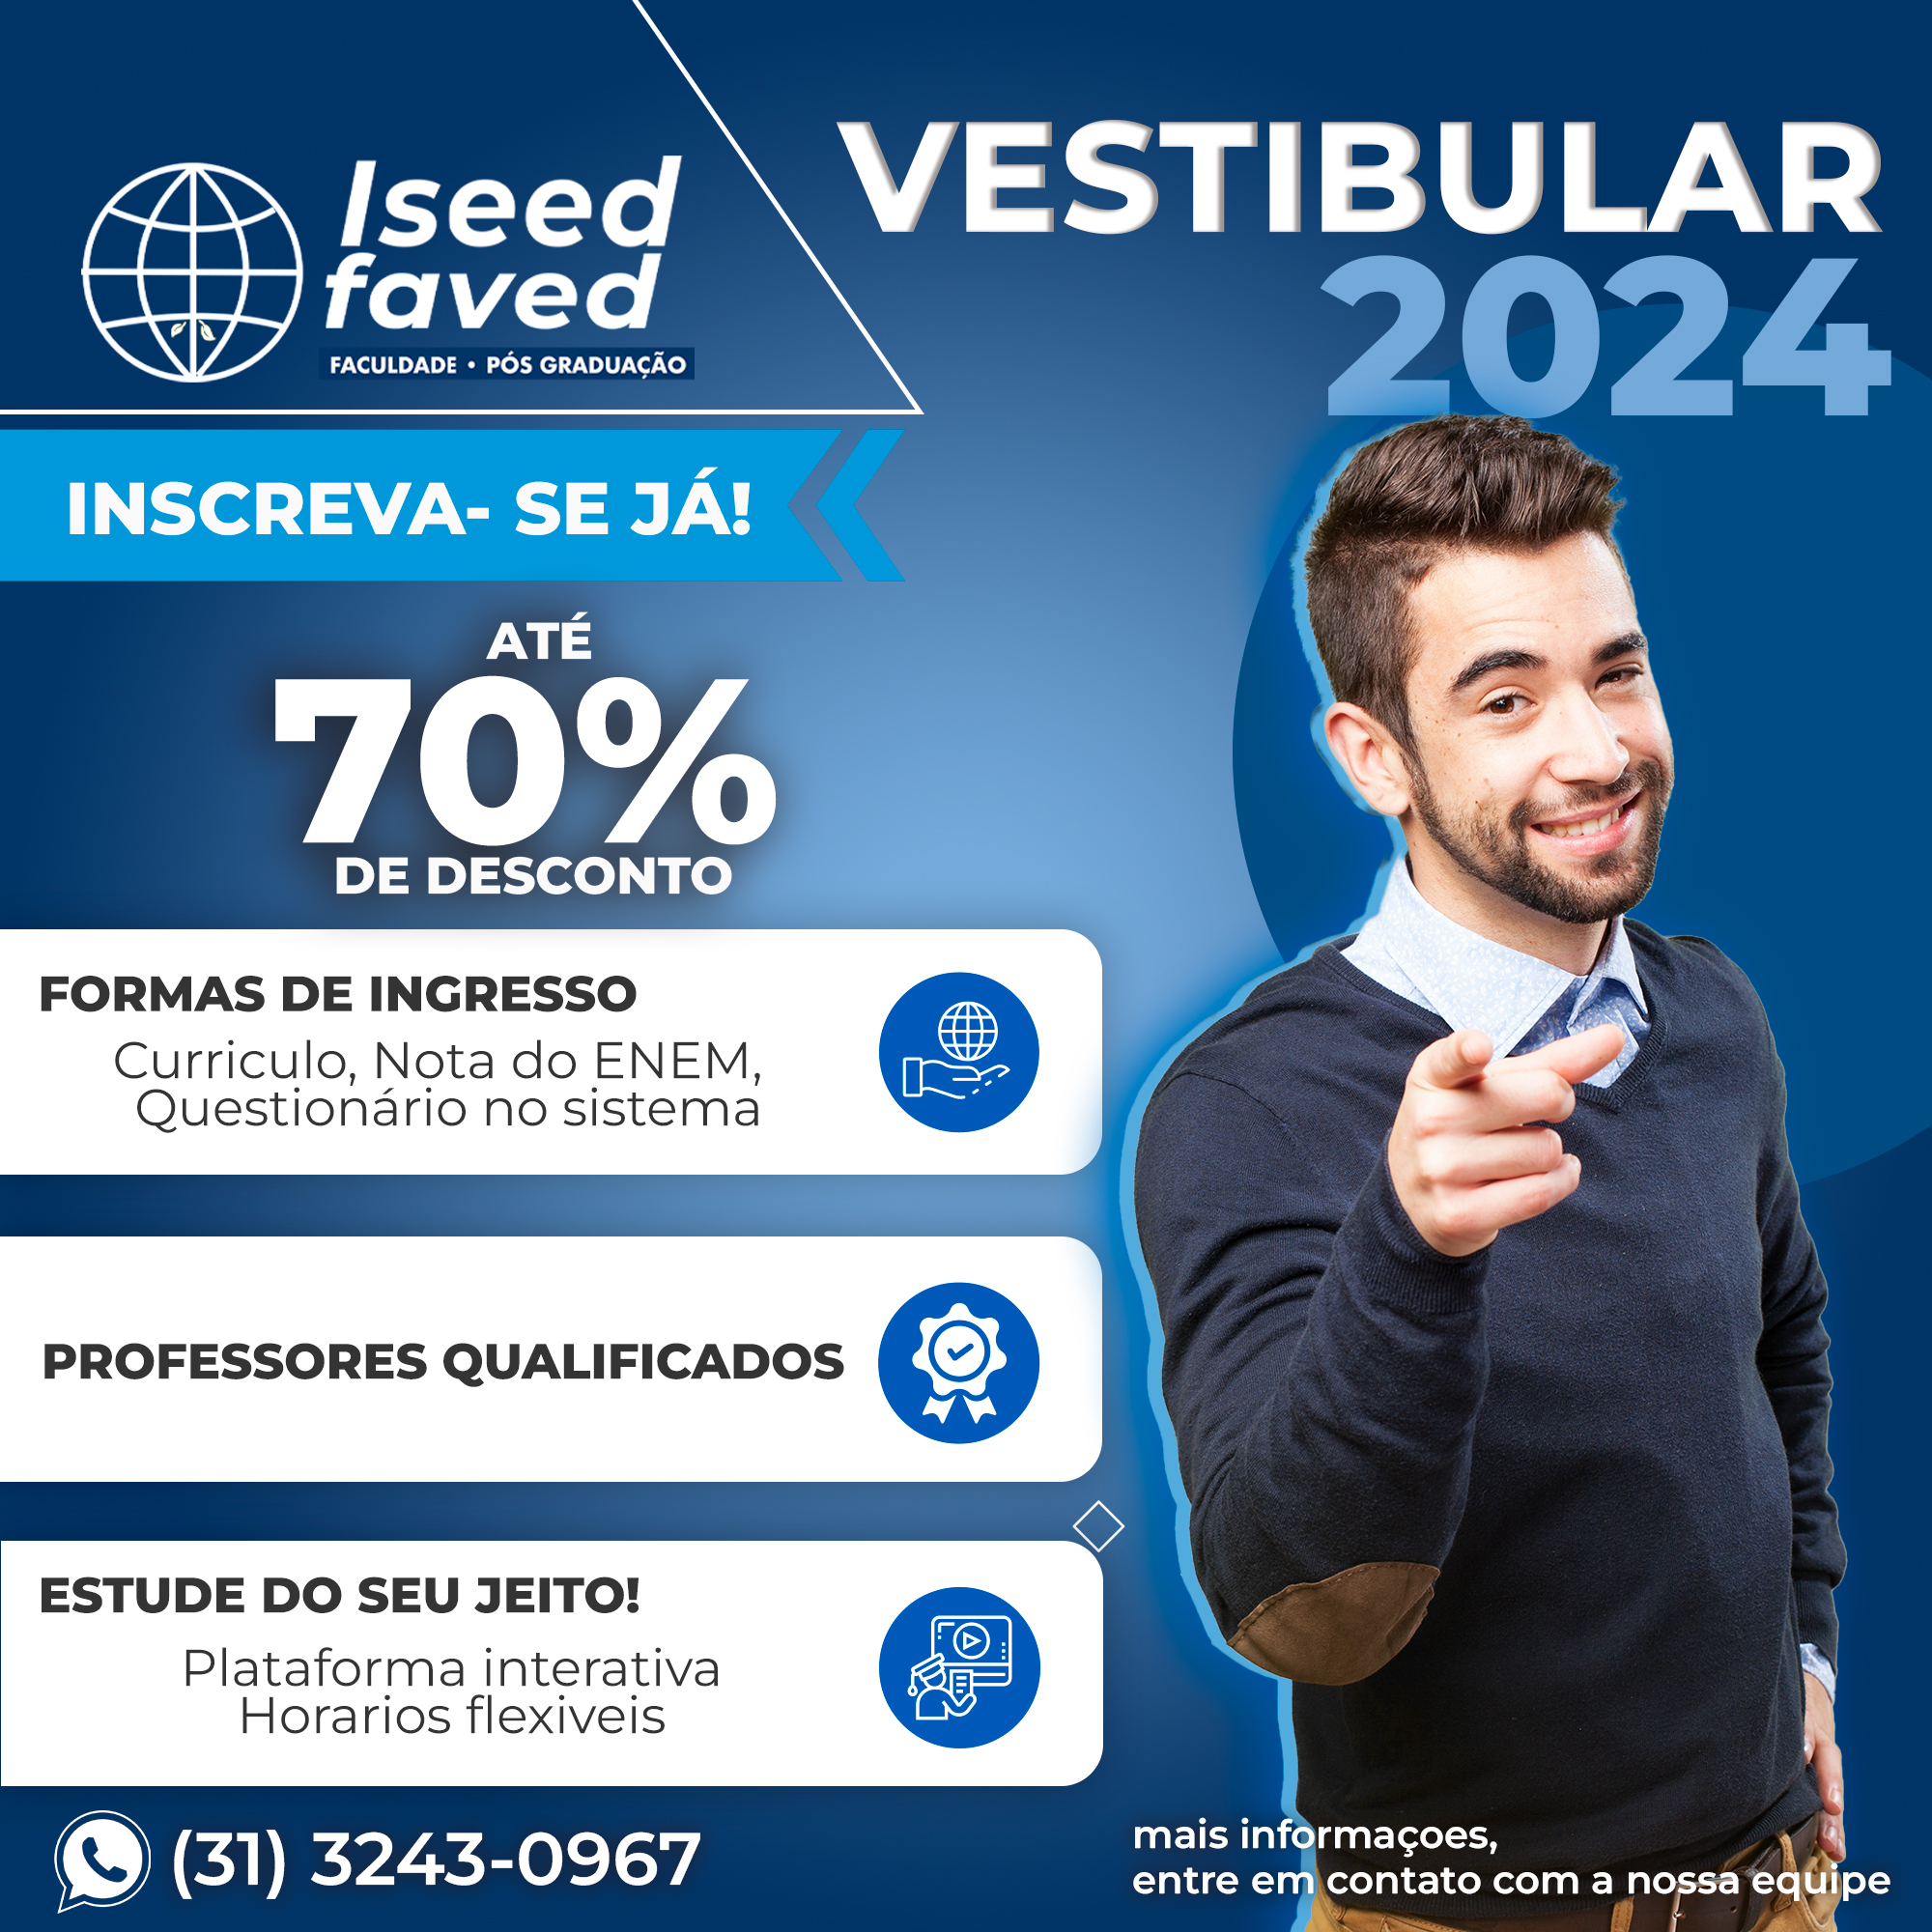 Iseed Faved Faculdades